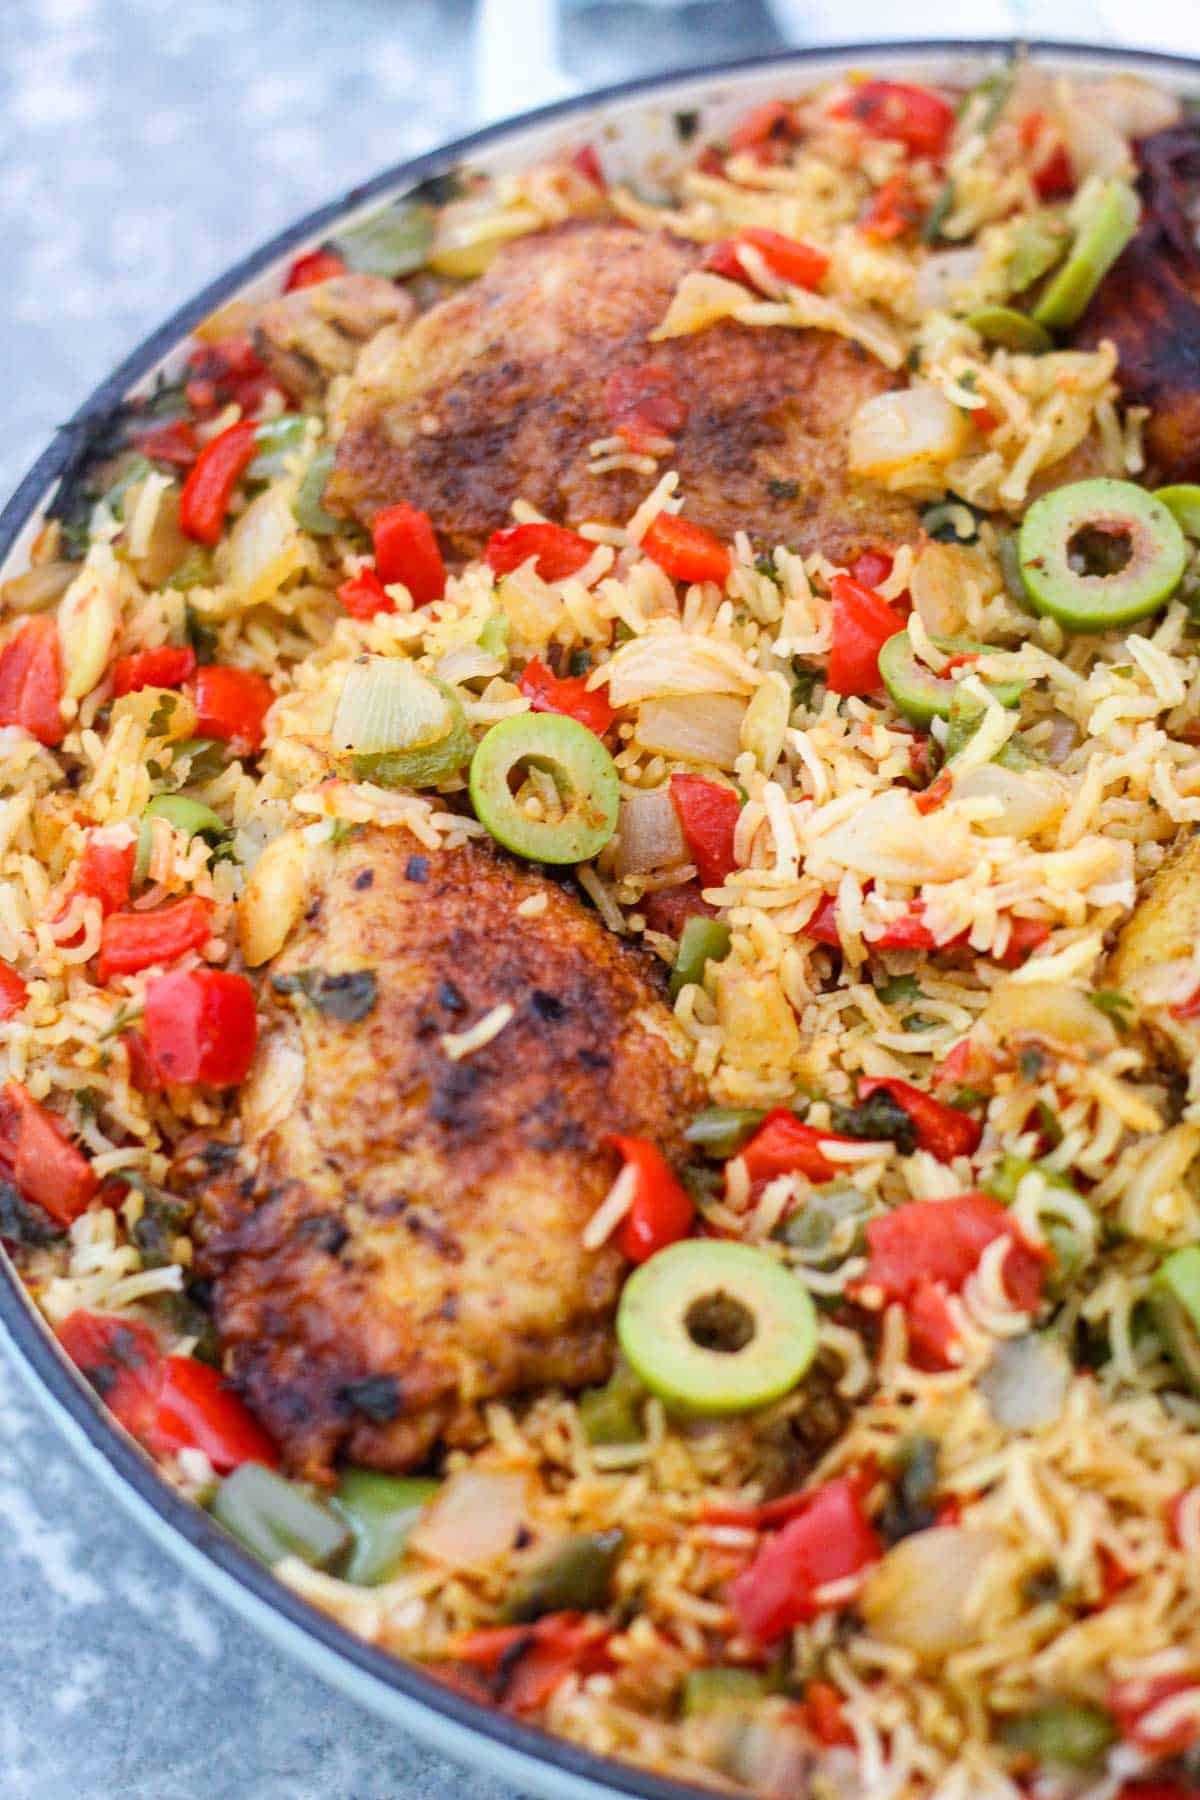 A pot showing cooked chicken, rice and lots of vegetables. Green olives, red peppers and onions are visible throughout the rice. 